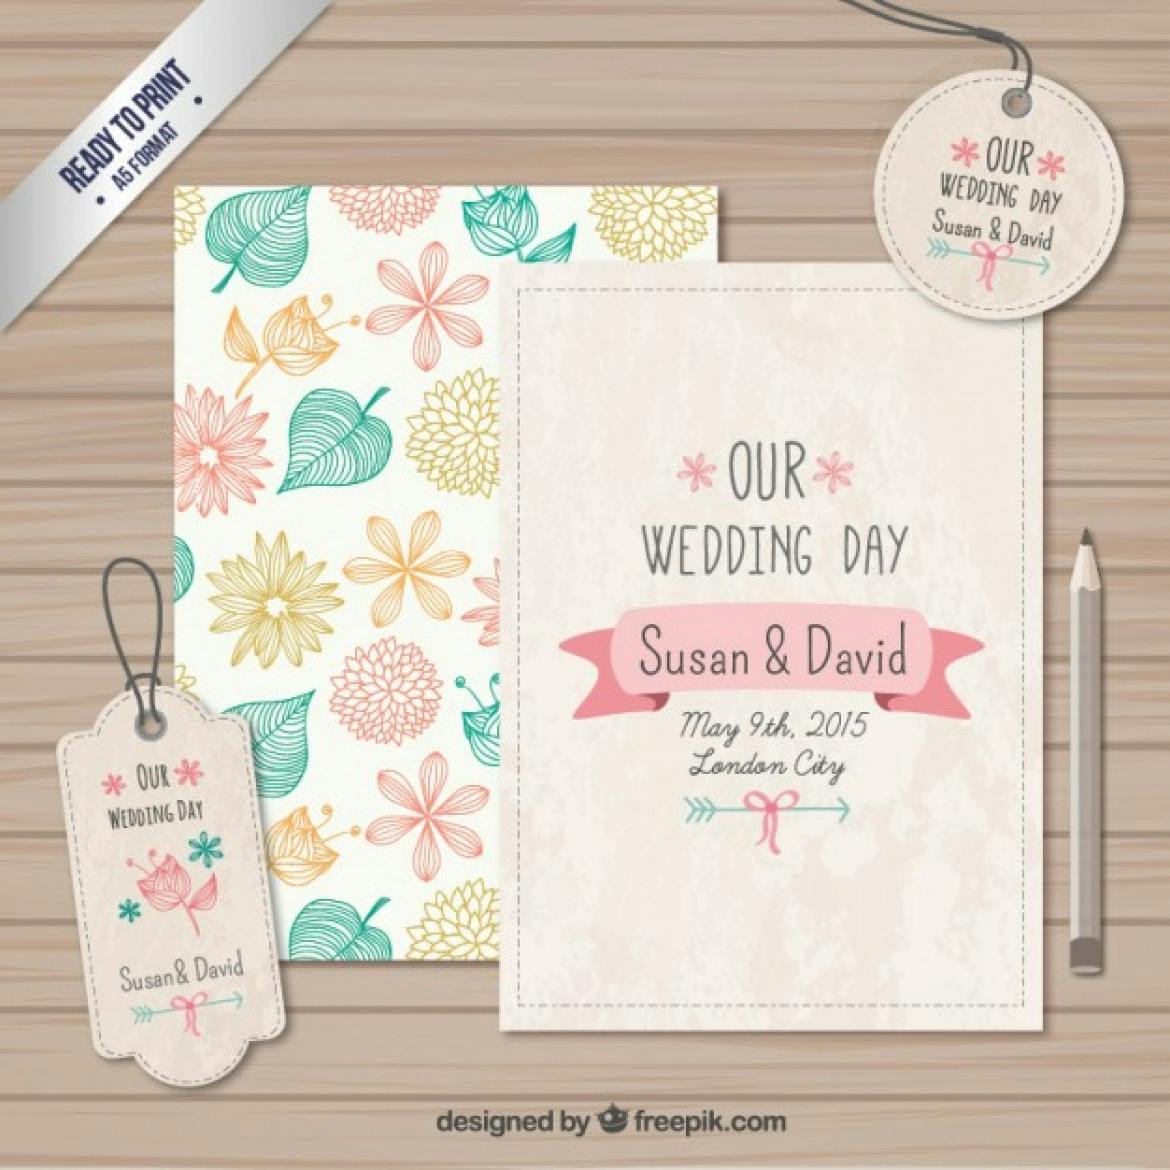 wpid-wedding-cards-and-labels_23-2147507259-1170x1170